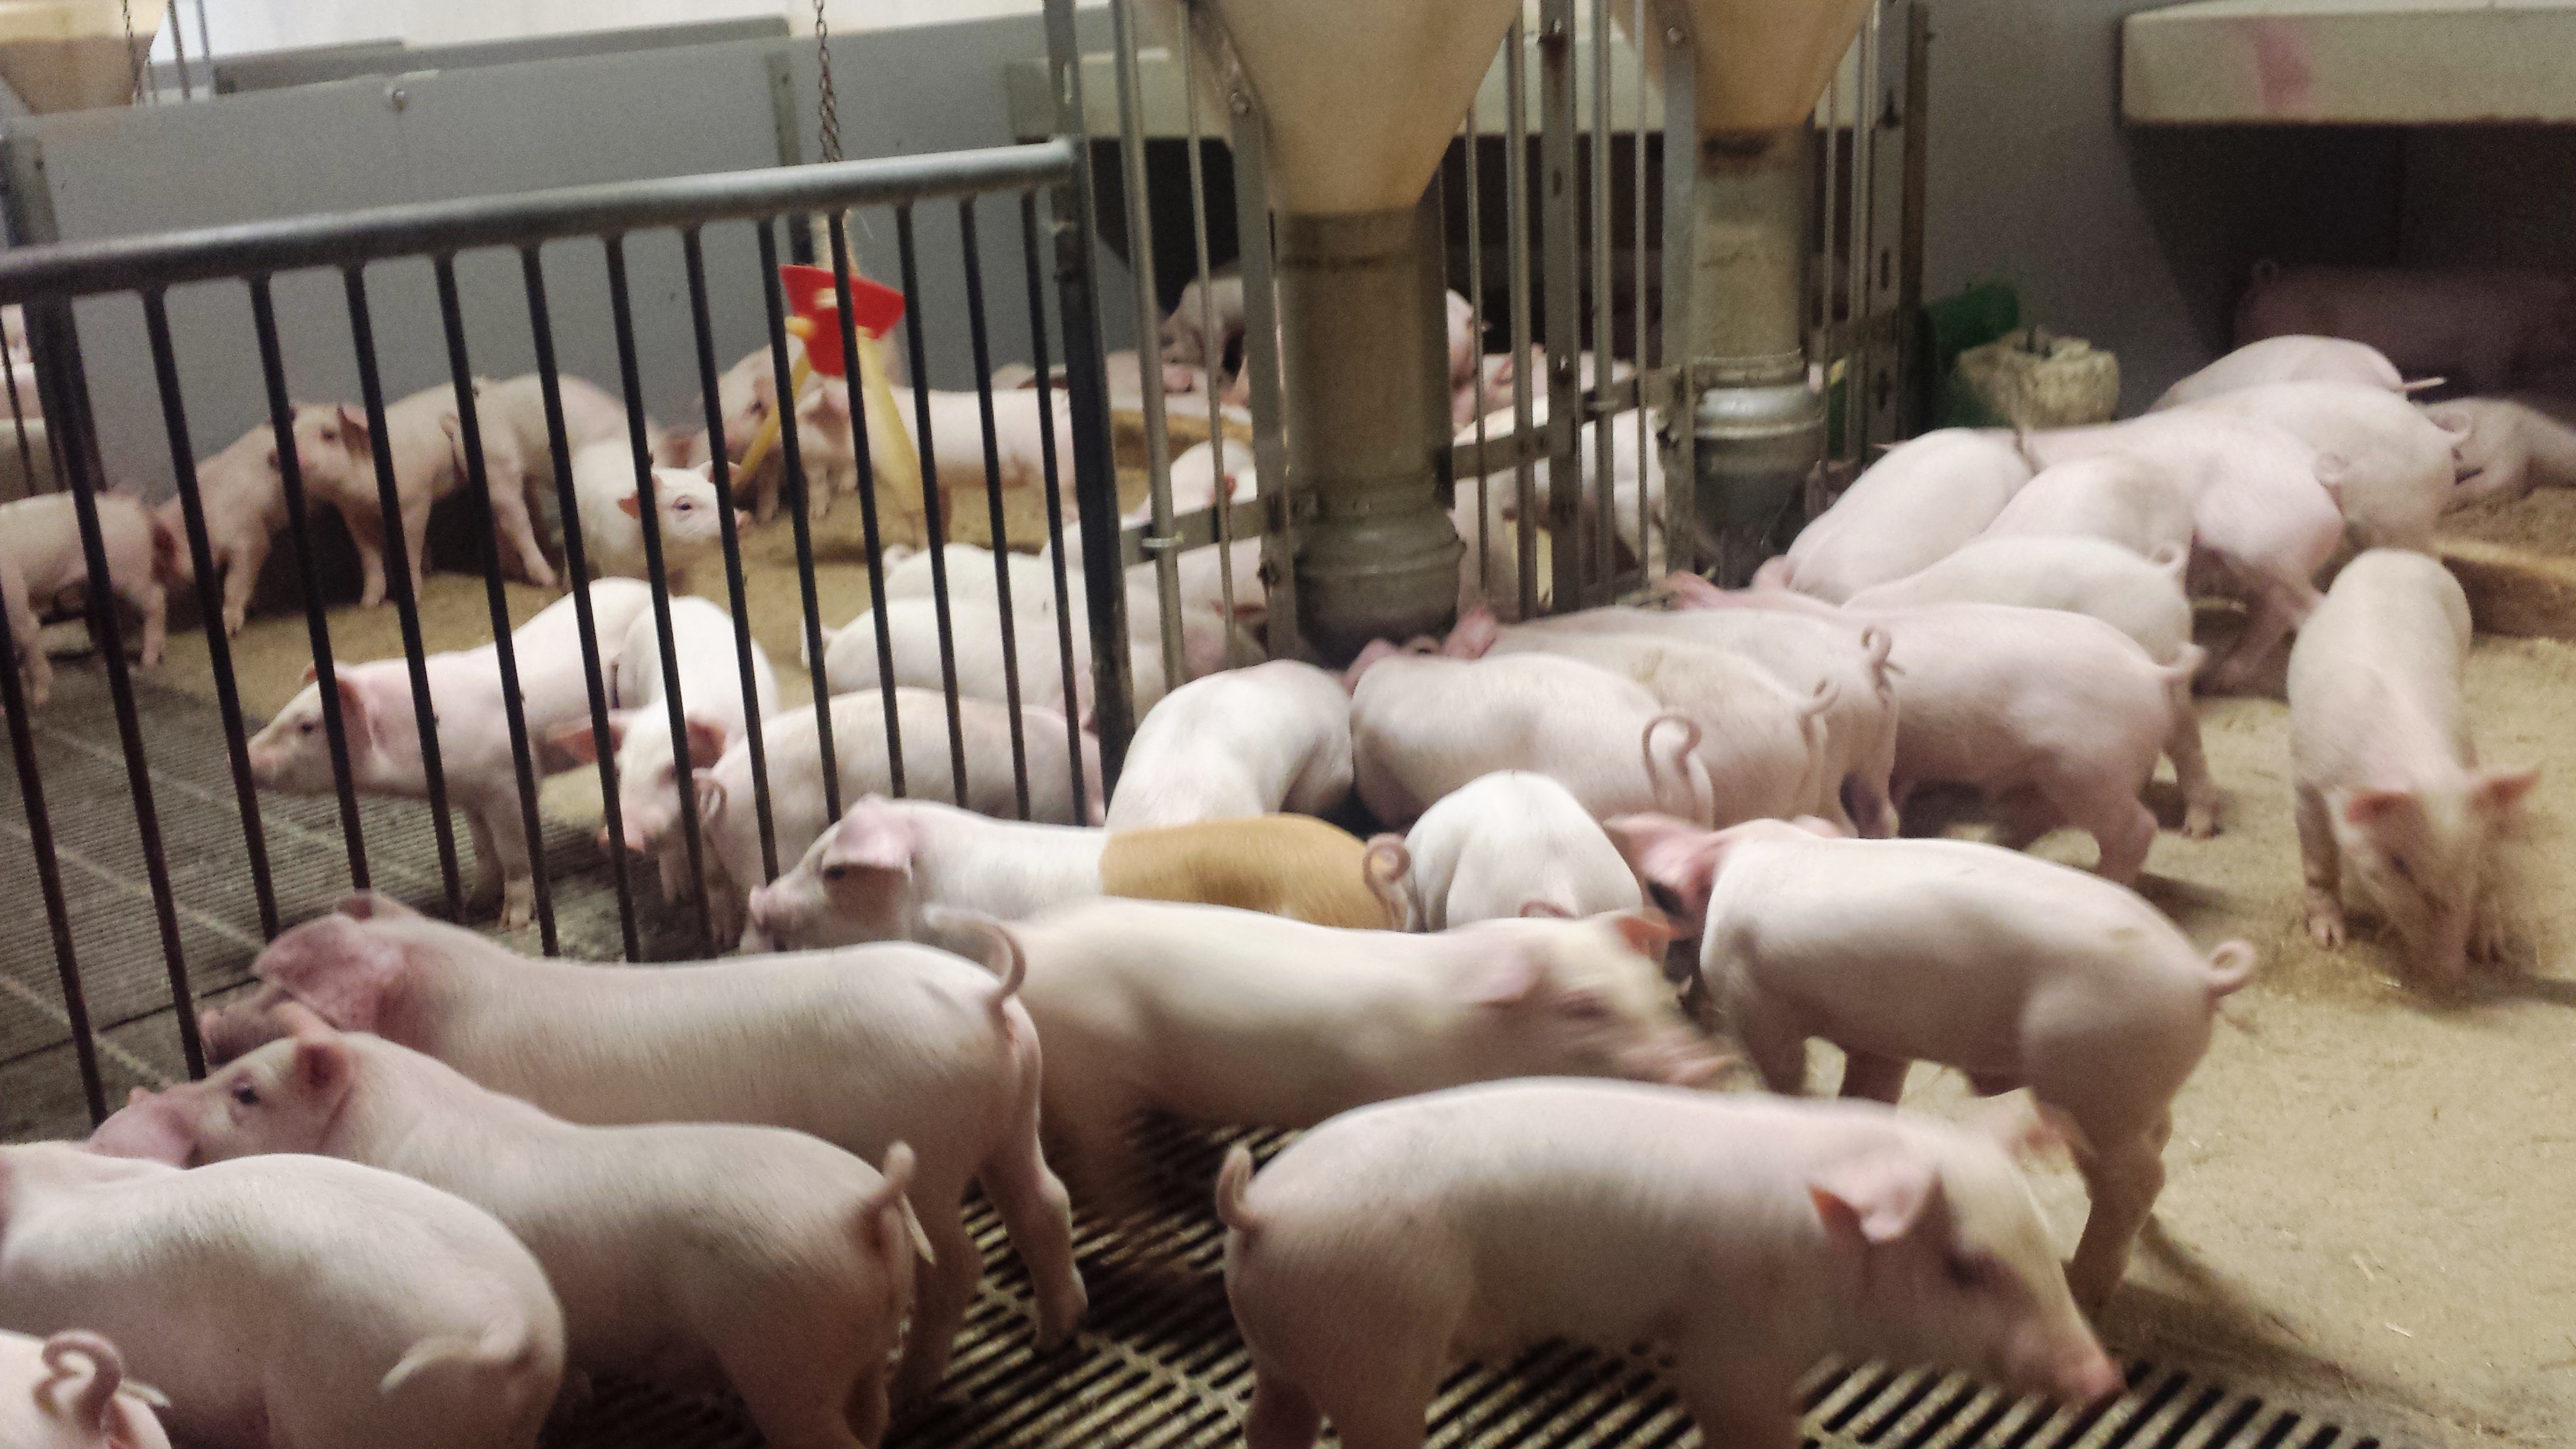 socialisation of young piglets in mixed group pens